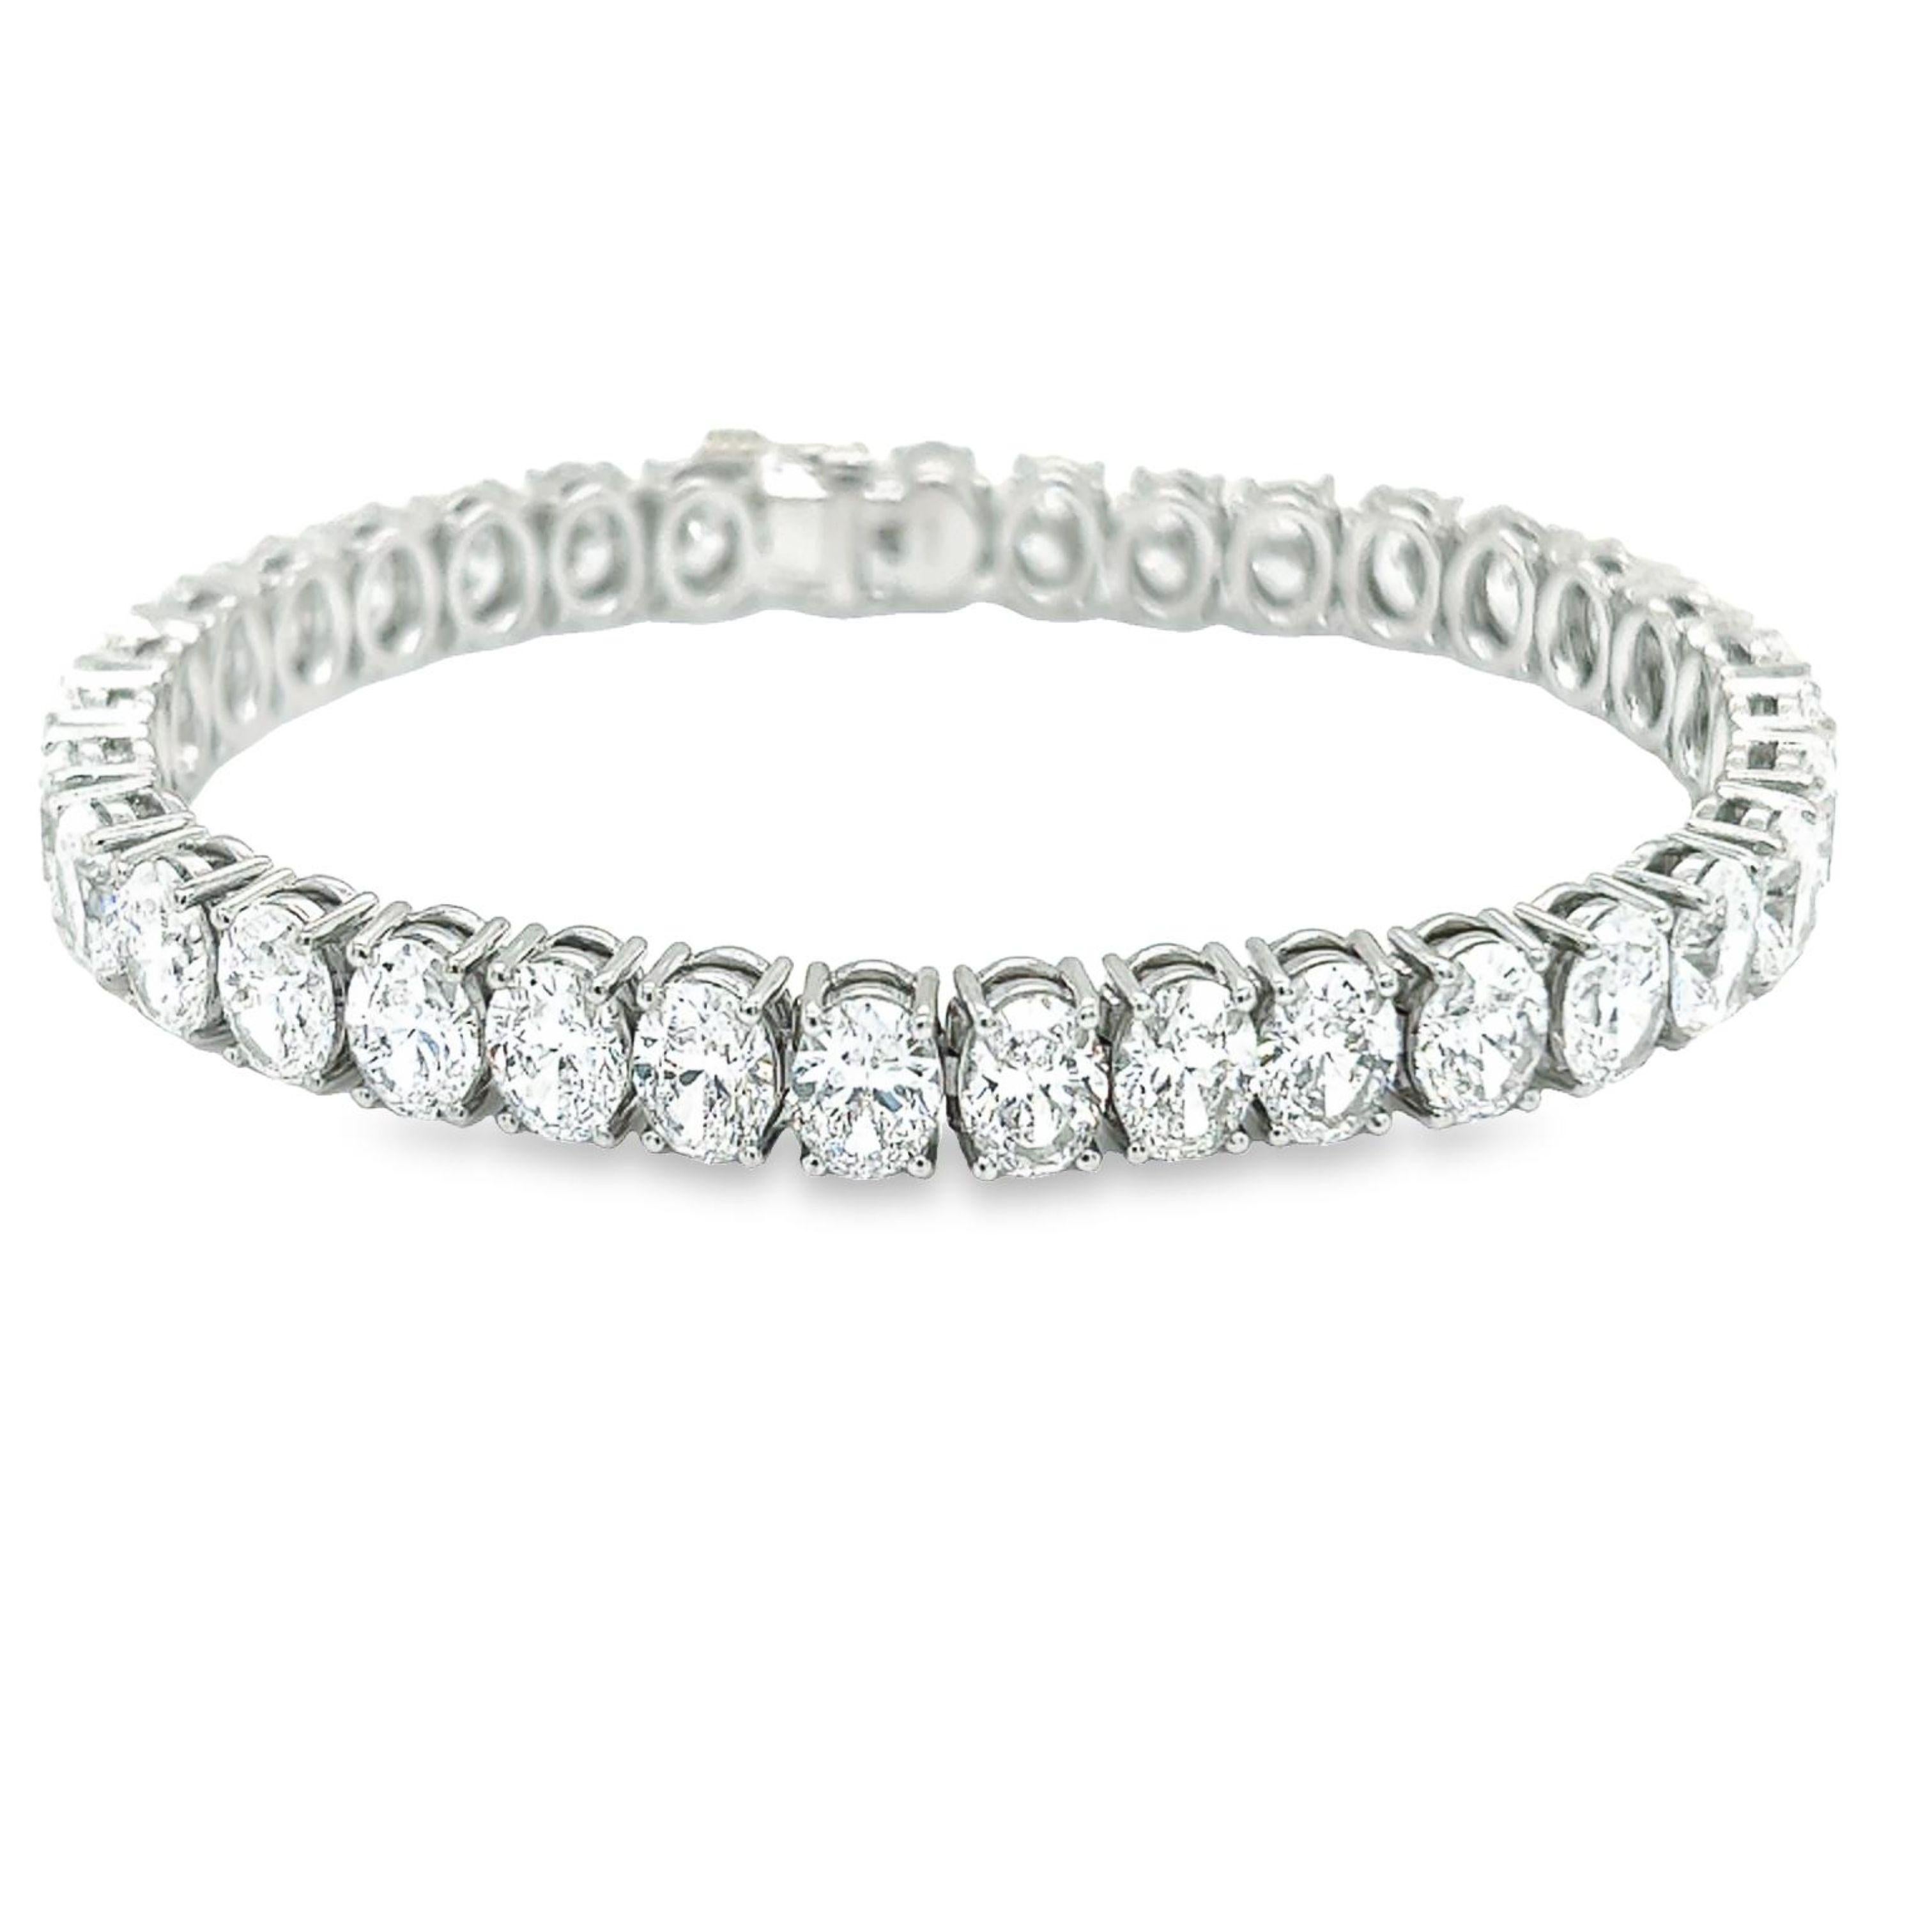 Rosenberg Diamonds & Co. 24.68 carat total weight Oval cut 7 inch diamond tennis bracelet set in platinum. This beautiful straight line bracelet consists of .70 carats, D-F in color VS2-IF in clarity. Each 35 stones are perfectly matched, top makes,